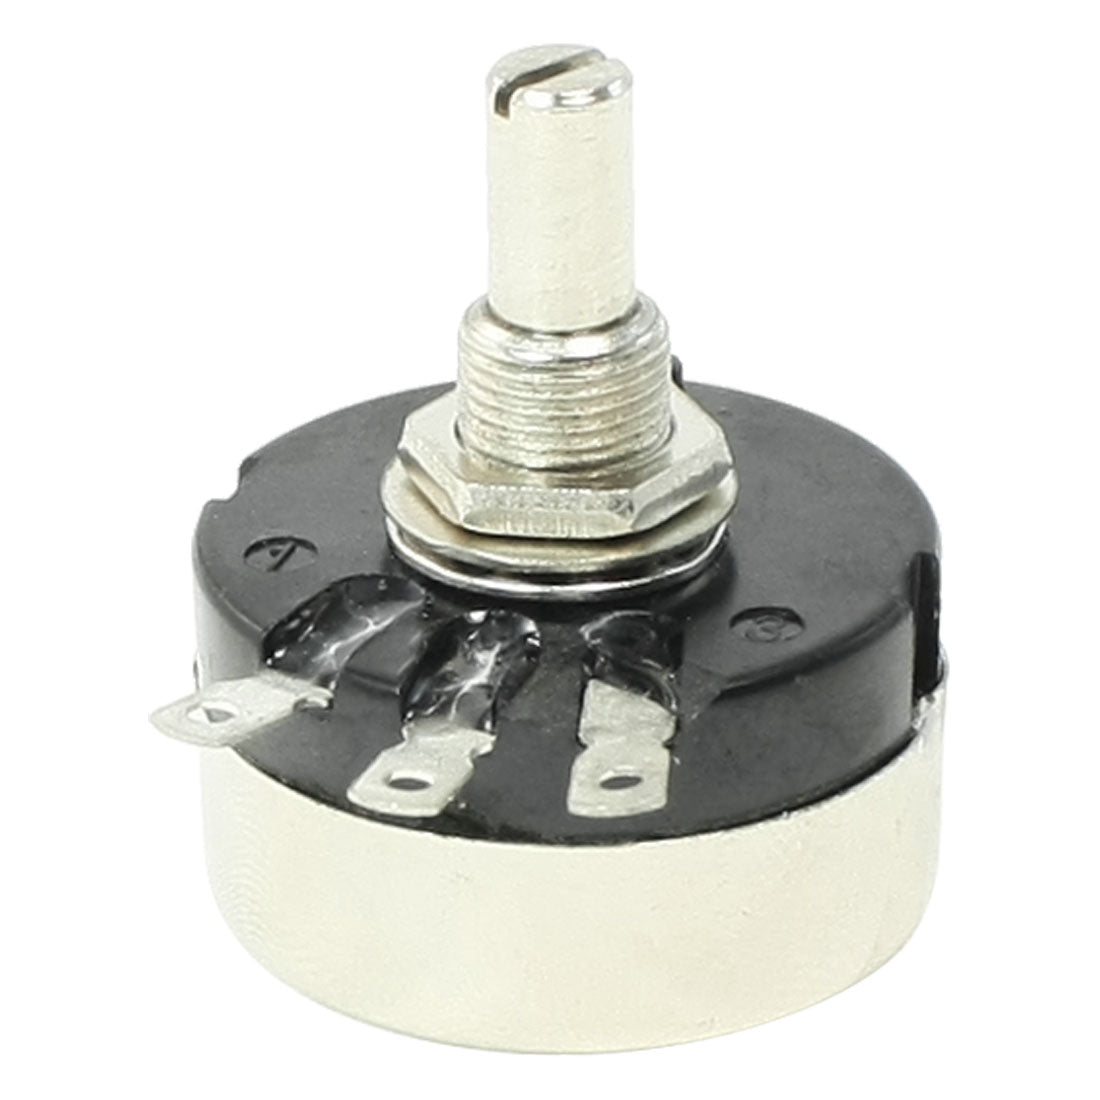 uxcell Uxcell RV30YN20S/B202 2K ohm 6mm Round Shaft Carbon Film Rotary Taper Potentiometer